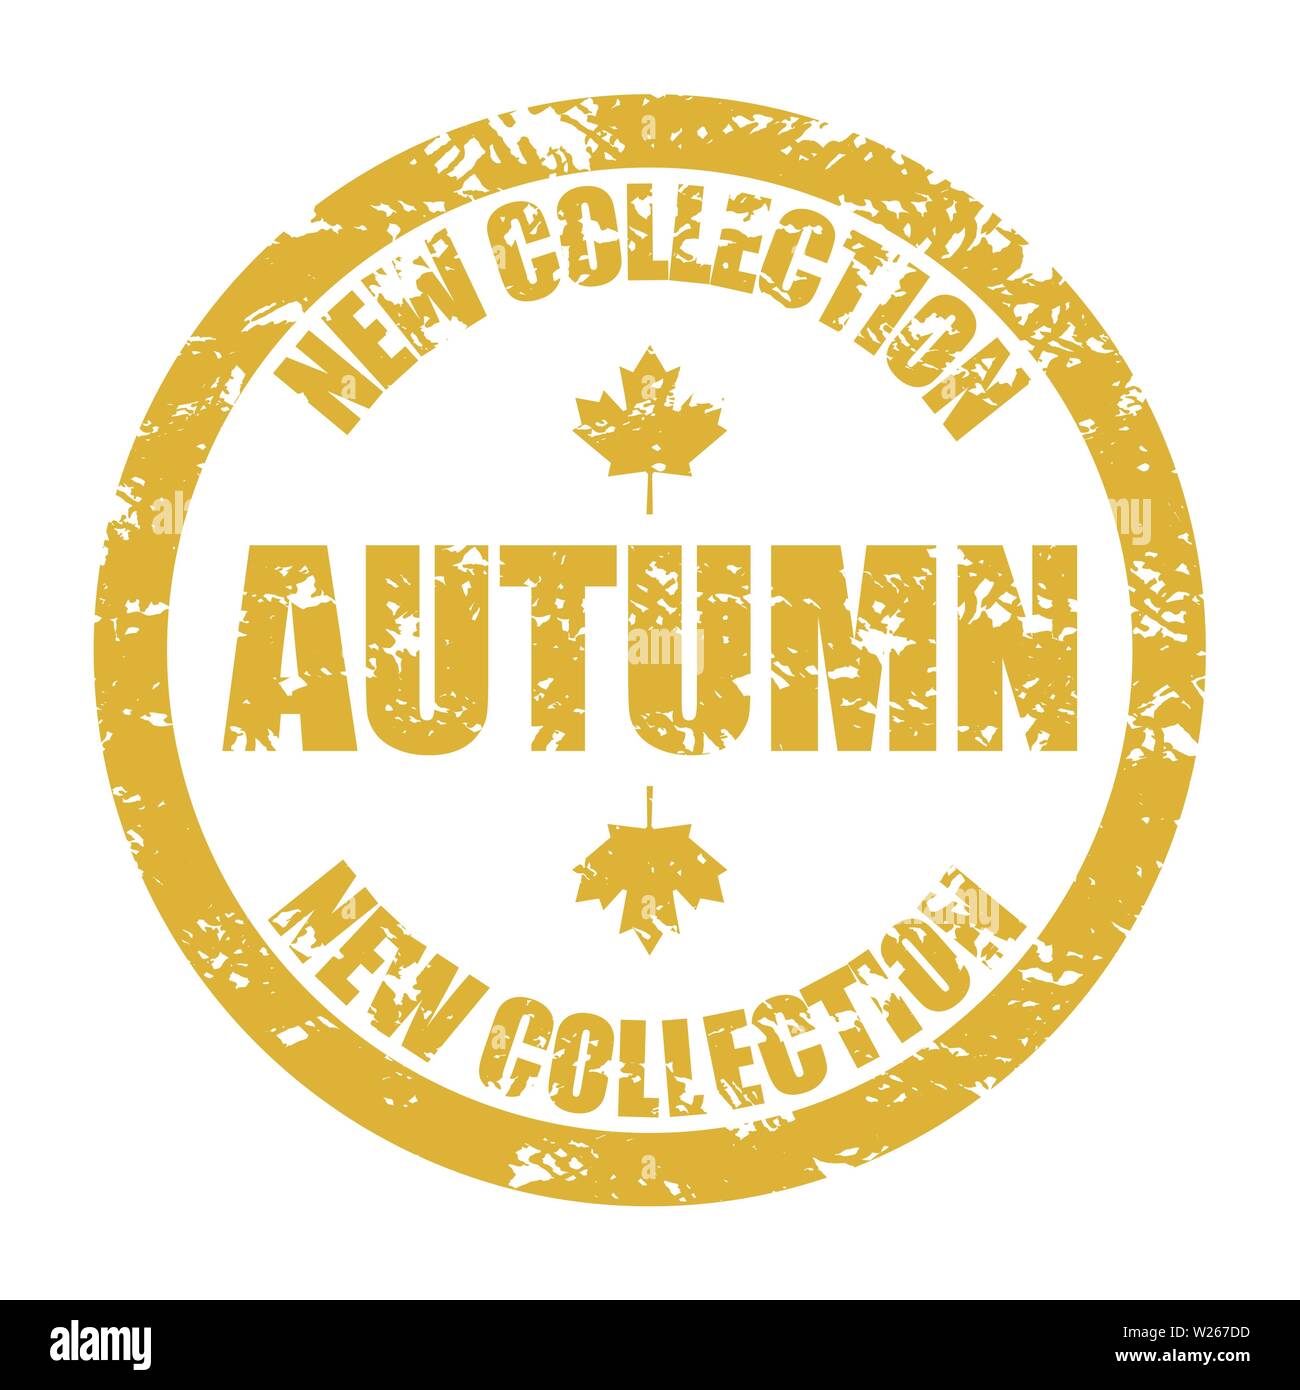 New autumn collection rubber stamp for retail and fashion store. Special vector seal, design graphic for market sale illustration Stock Vector